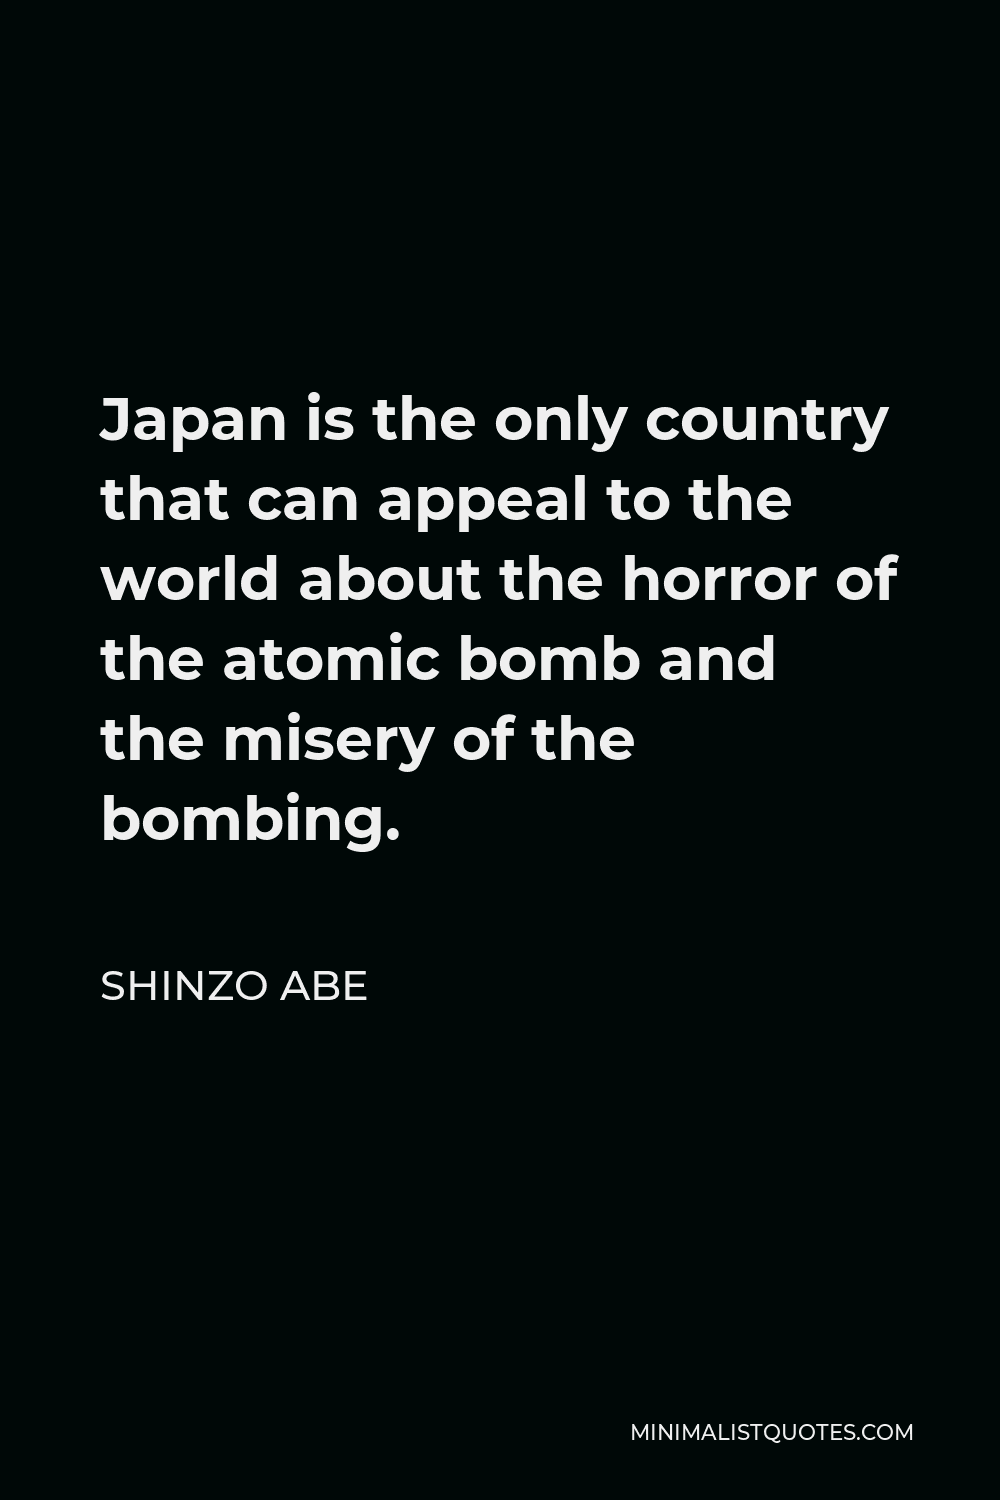 Shinzo Abe Quote - Japan is the only country that can appeal to the world about the horror of the atomic bomb and the misery of the bombing.